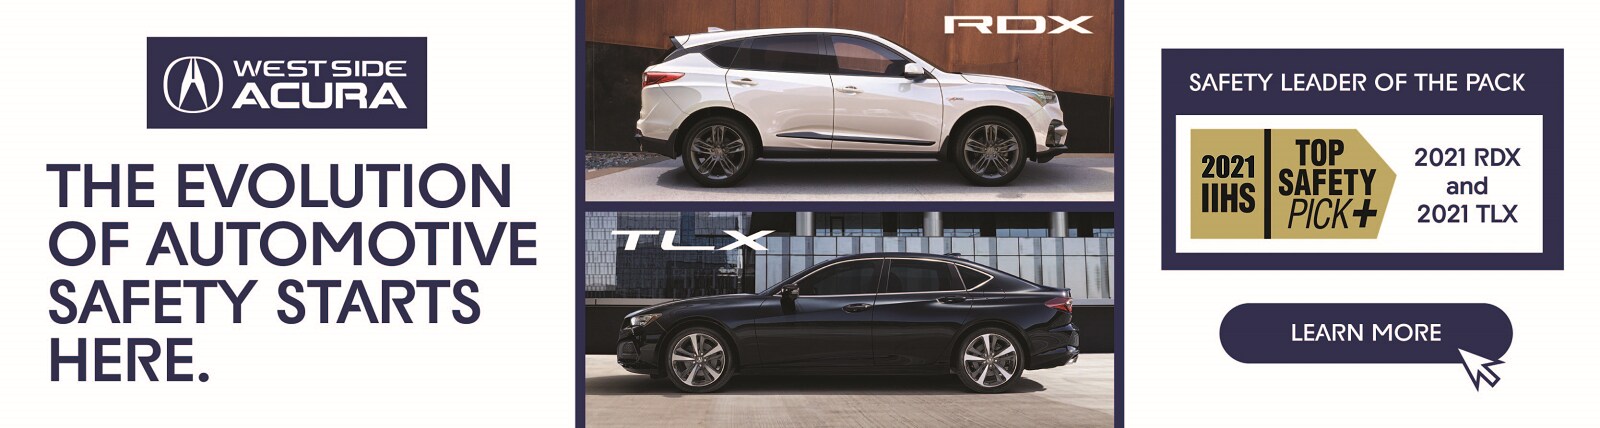 IHS Safety Picks Acura RDX AND TLX